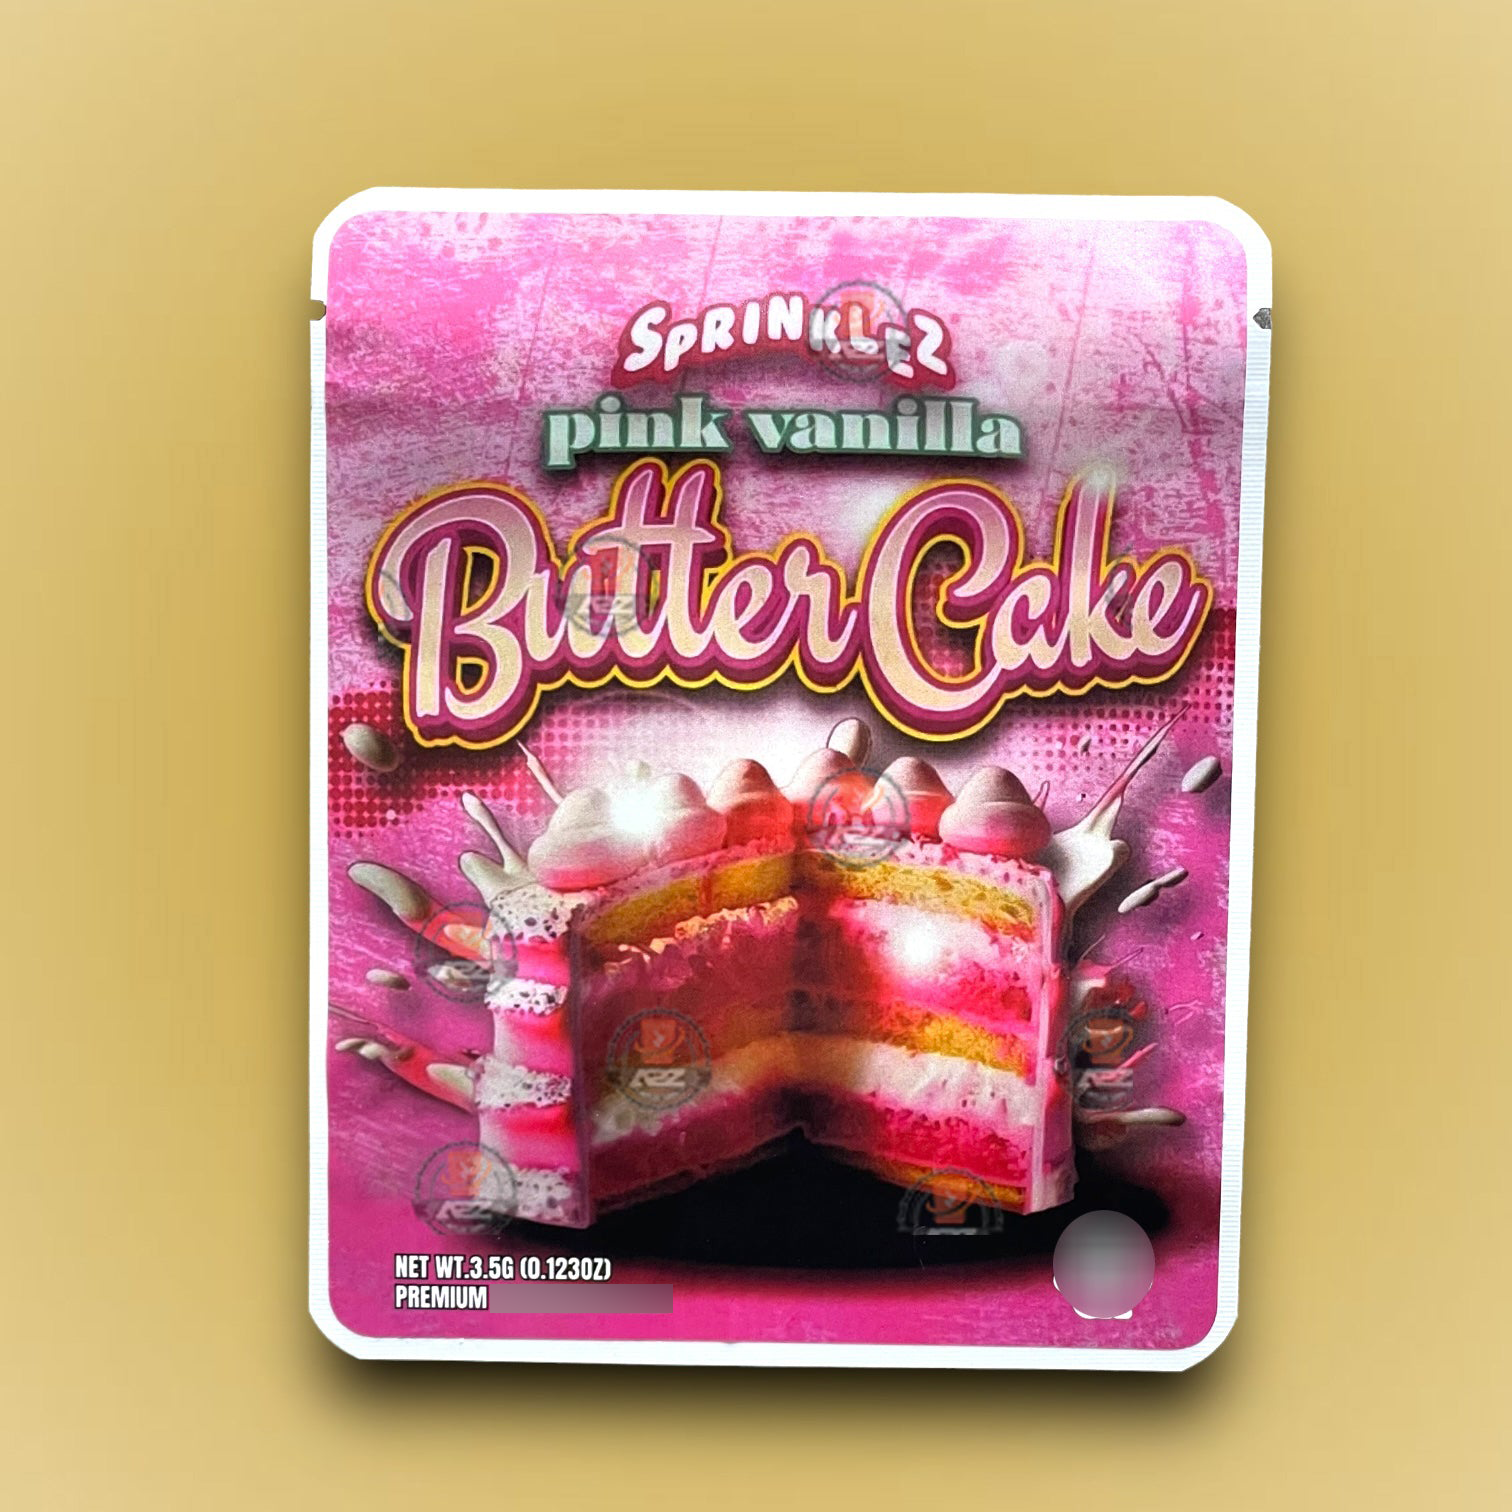 Sprinklez Pink Vanilla Butter Cake 3.5g Mylar Bags -With stickers and label